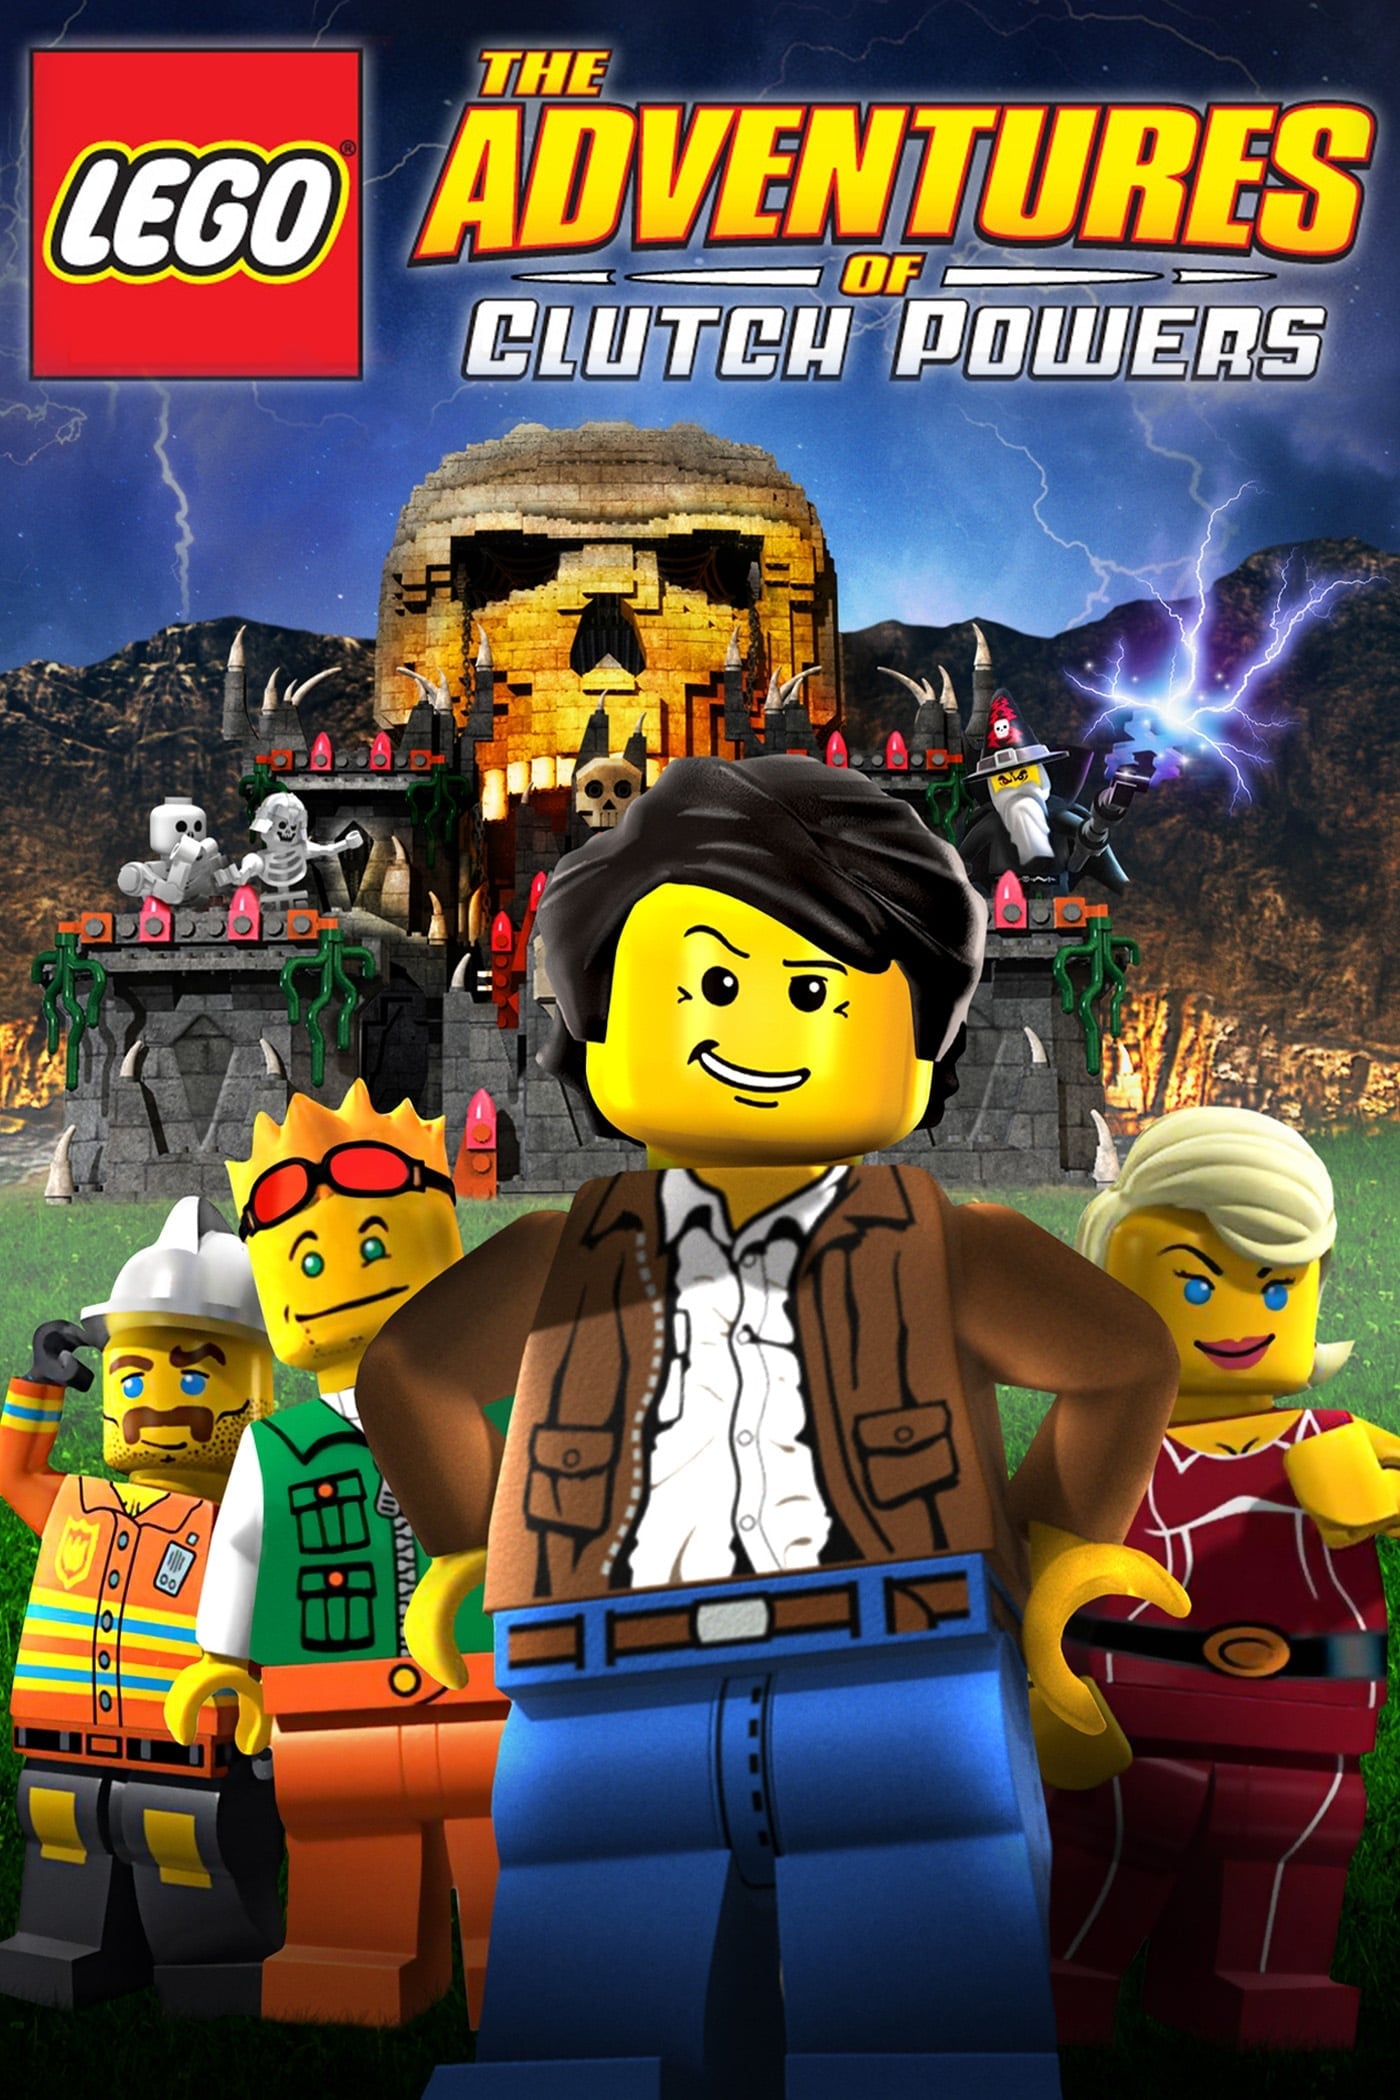 LEGO: The Adventures of Clutch Powers (LEGO: The Adventures of Clutch Powers) [2010]